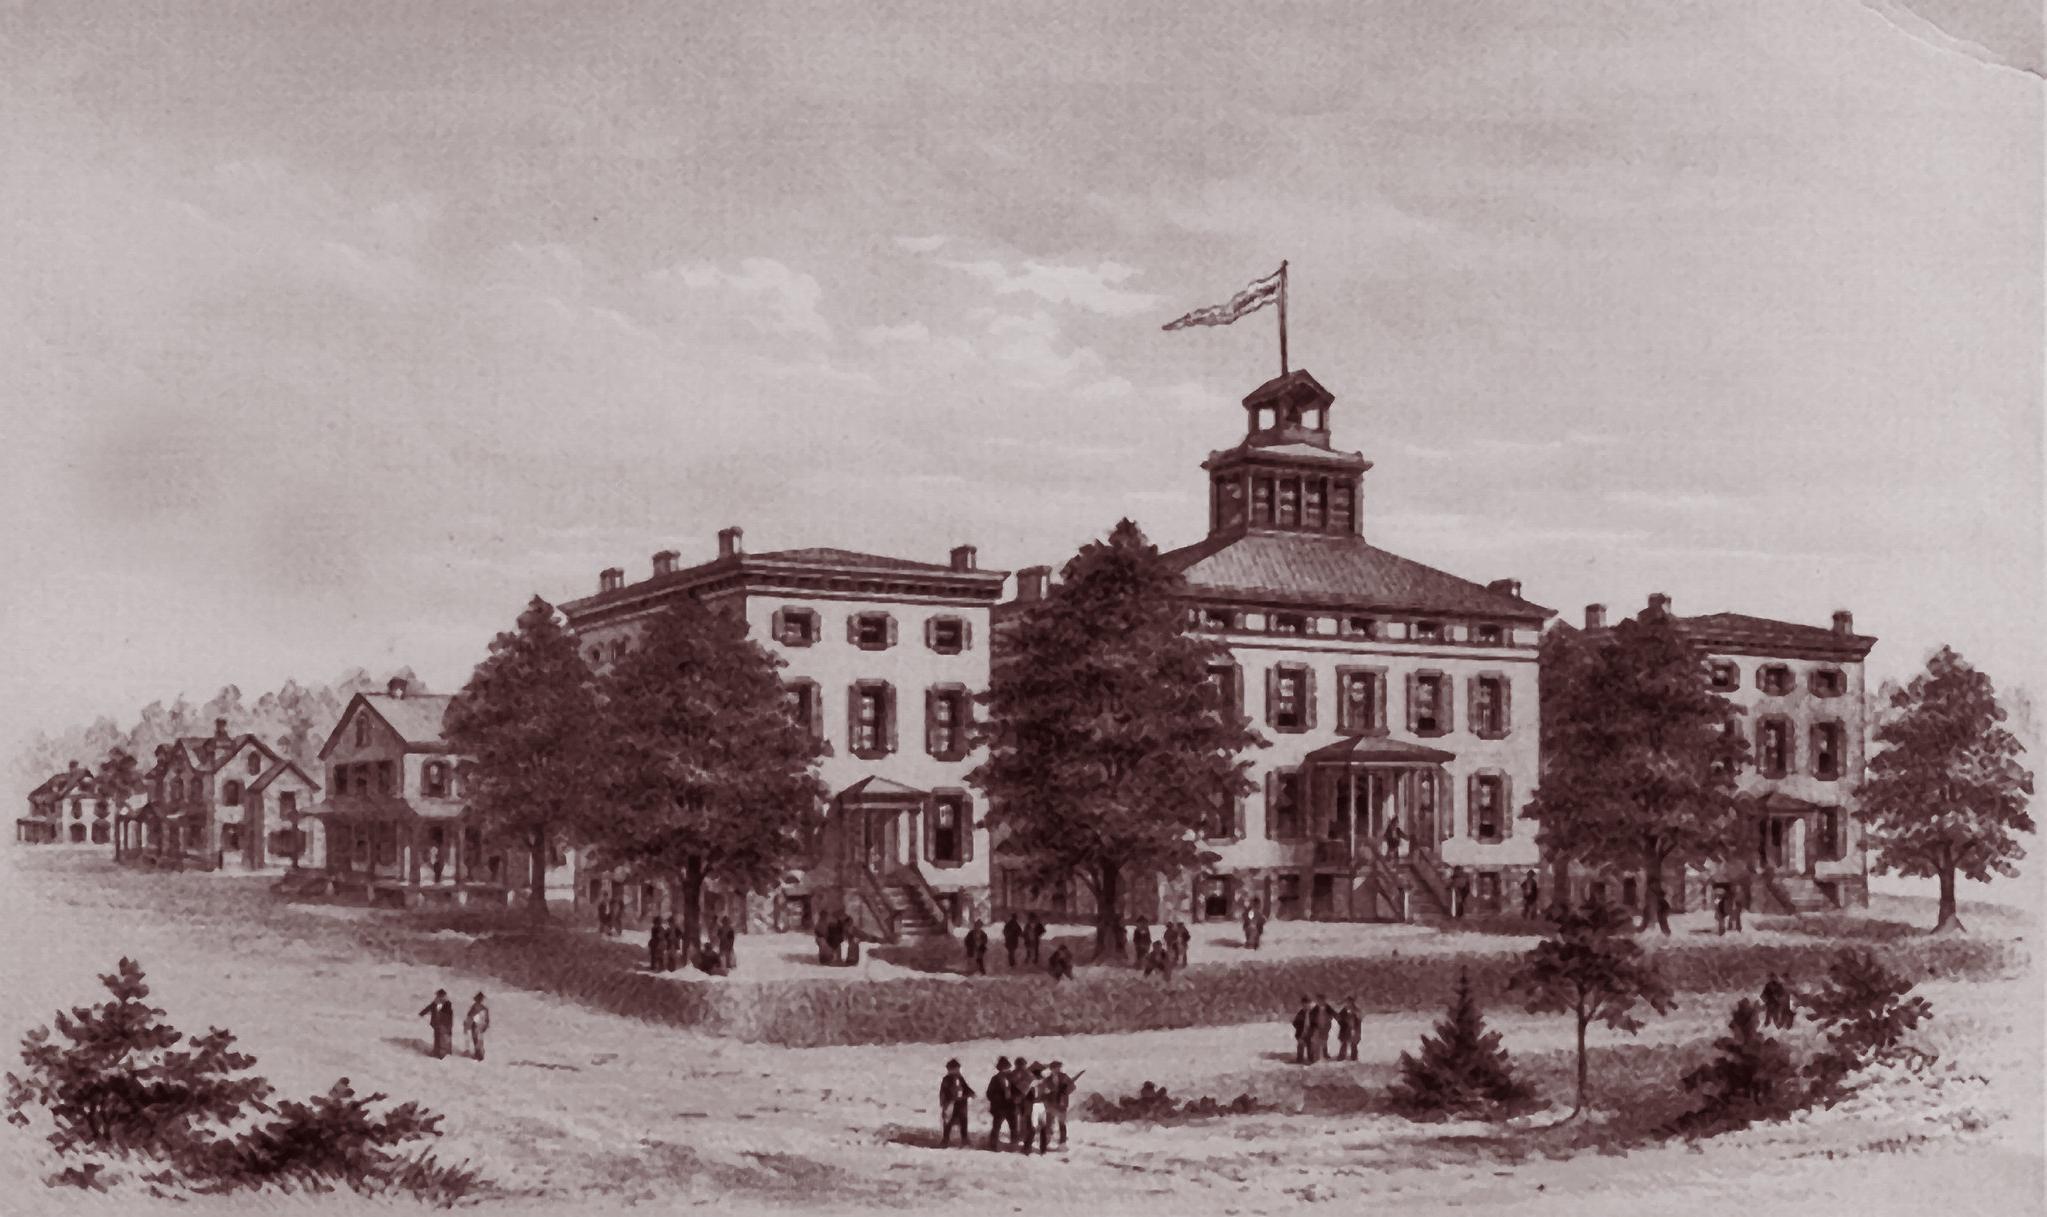 The Hill Dorms in 1860